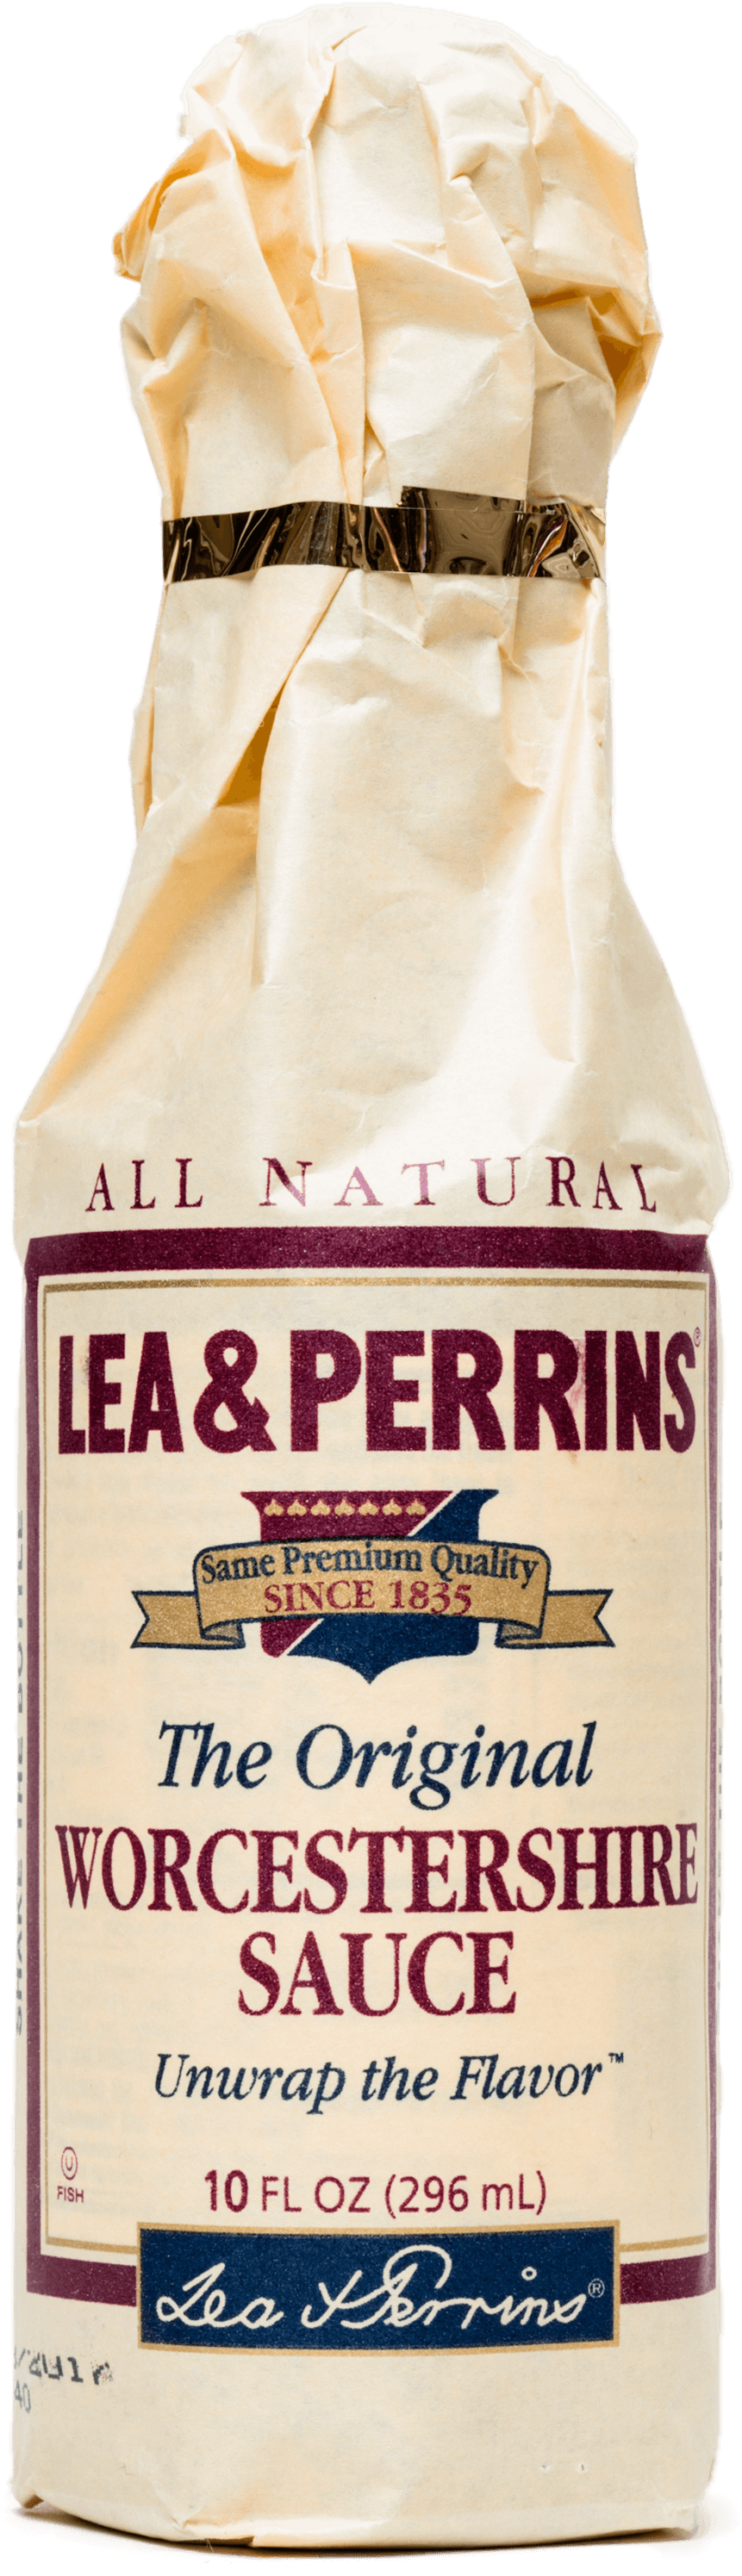 894-8945262_worcestershire-sauce-lea-and-perrins